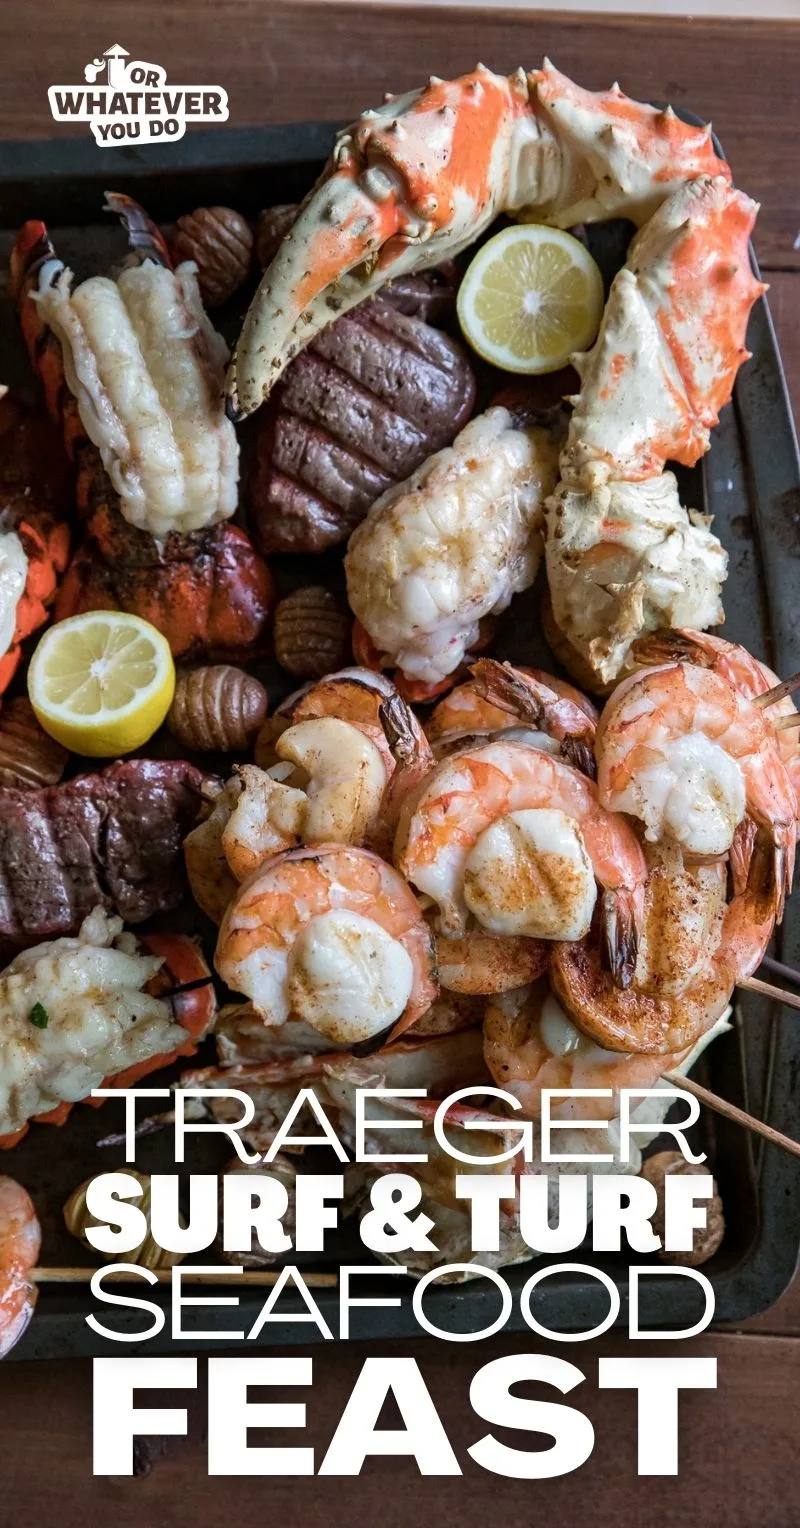 Traeger Surf And Turf Seafood Feast - Or Whatever You Do